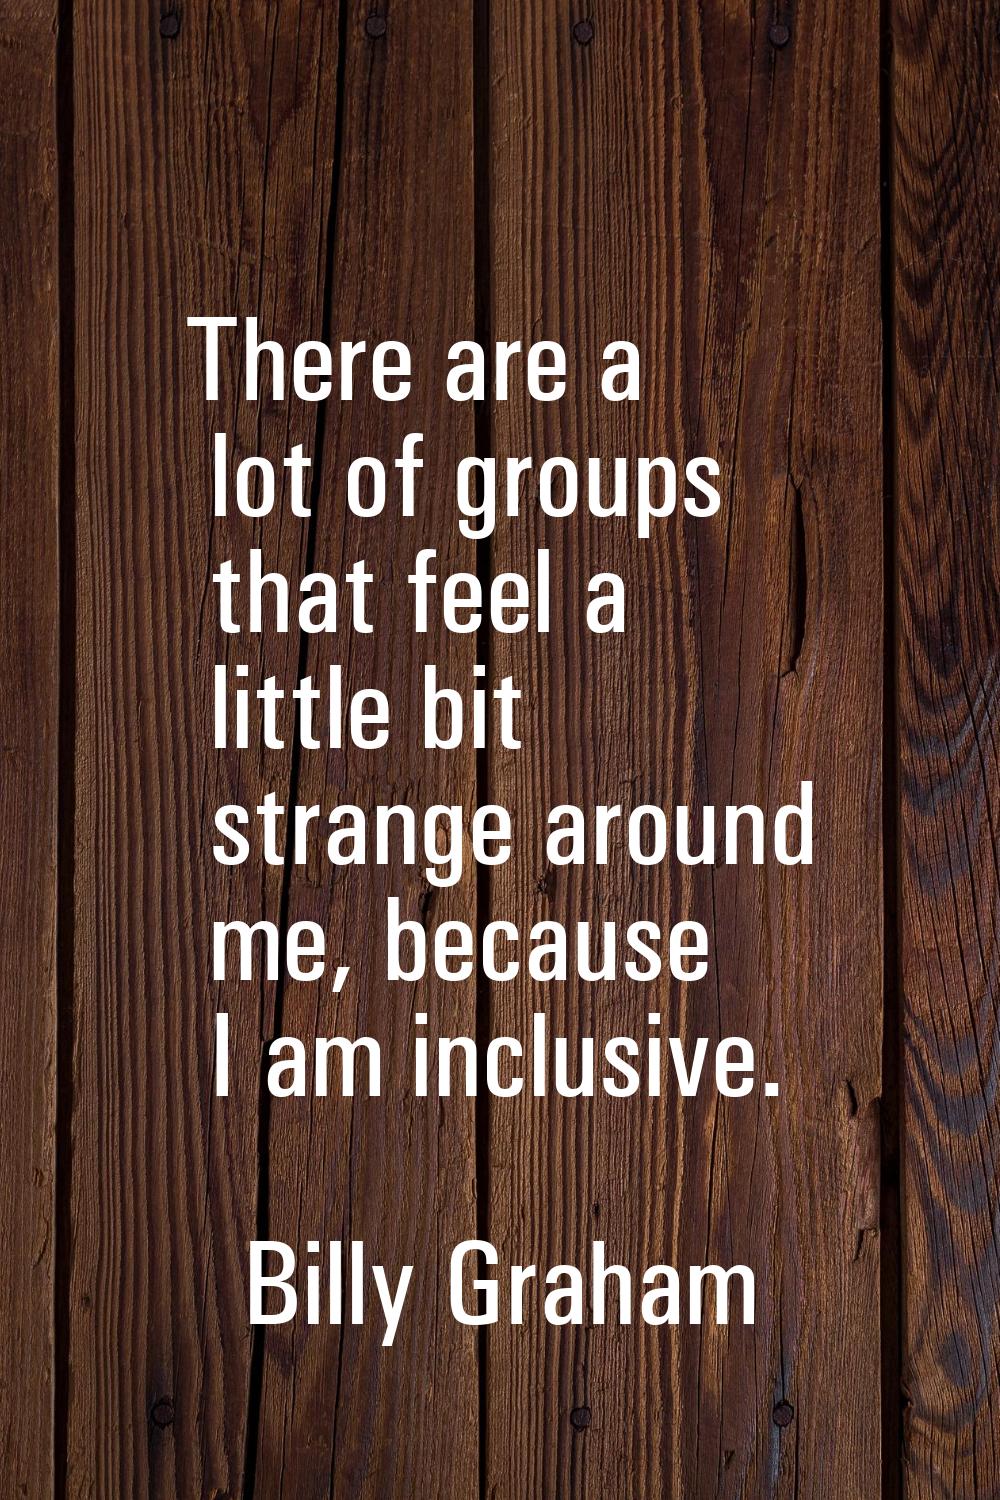 There are a lot of groups that feel a little bit strange around me, because I am inclusive.